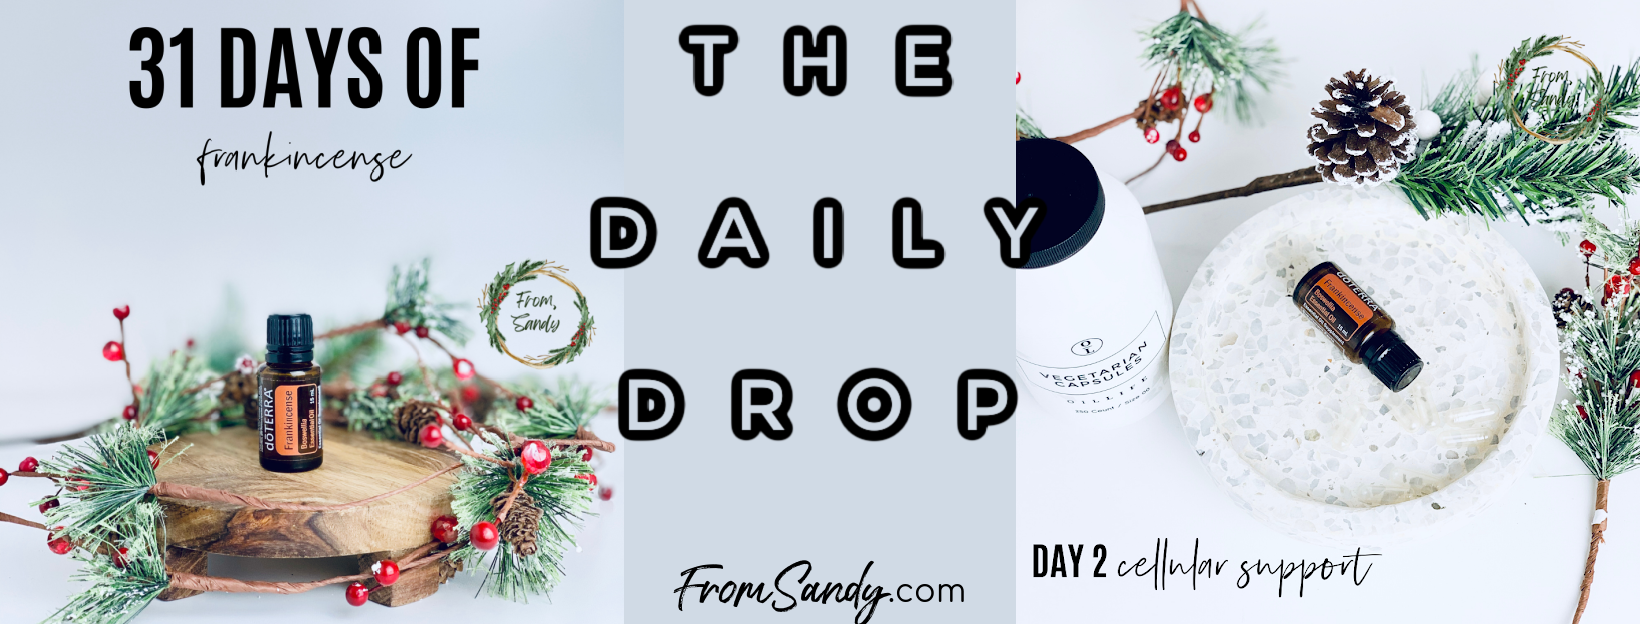 Cellular Support (31 Days of Frankincense: Day 2), From Sandy